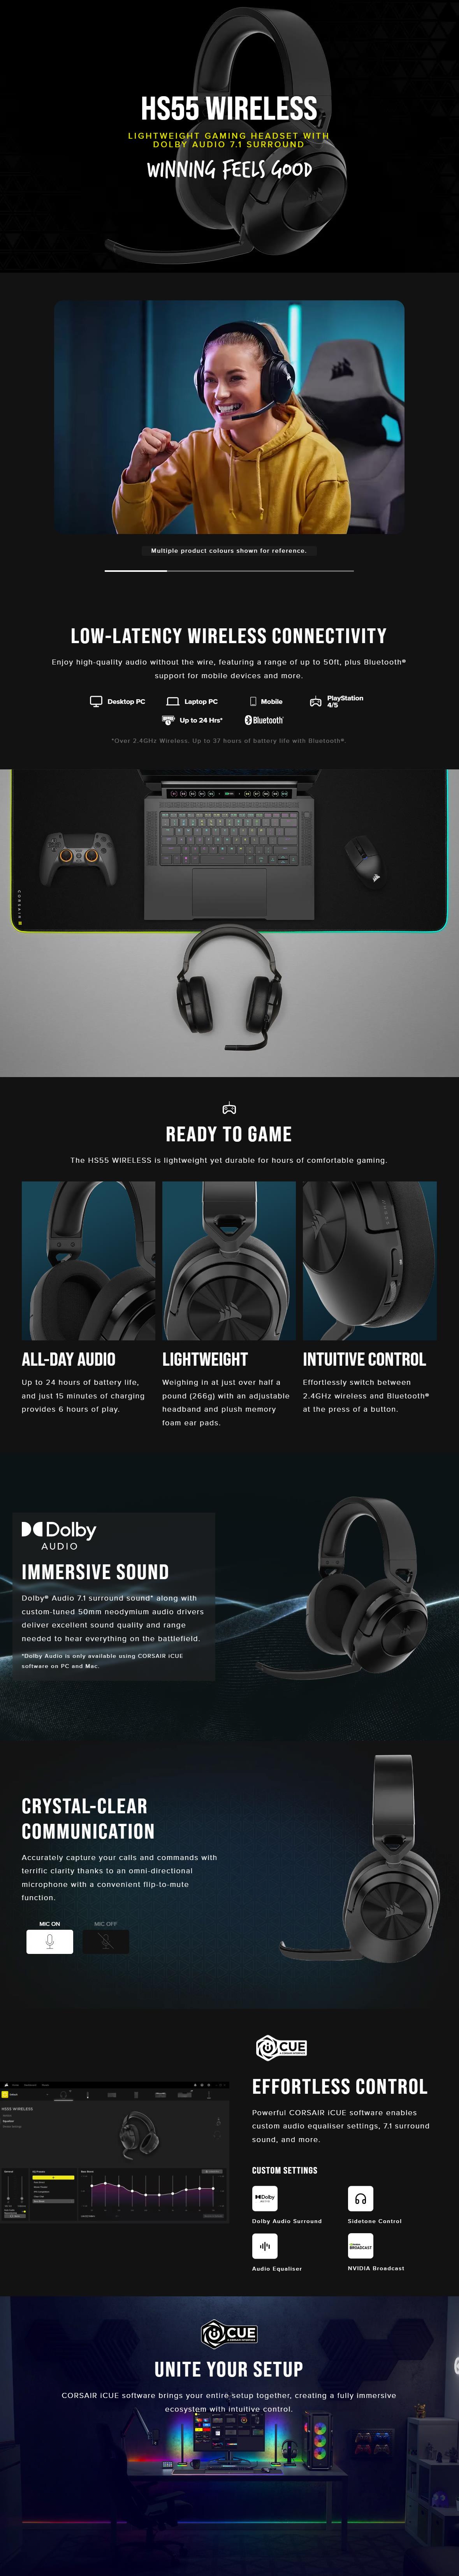 A large marketing image providing additional information about the product Corsair HS55 WIRELESS Gaming Headset — Carbon - Additional alt info not provided